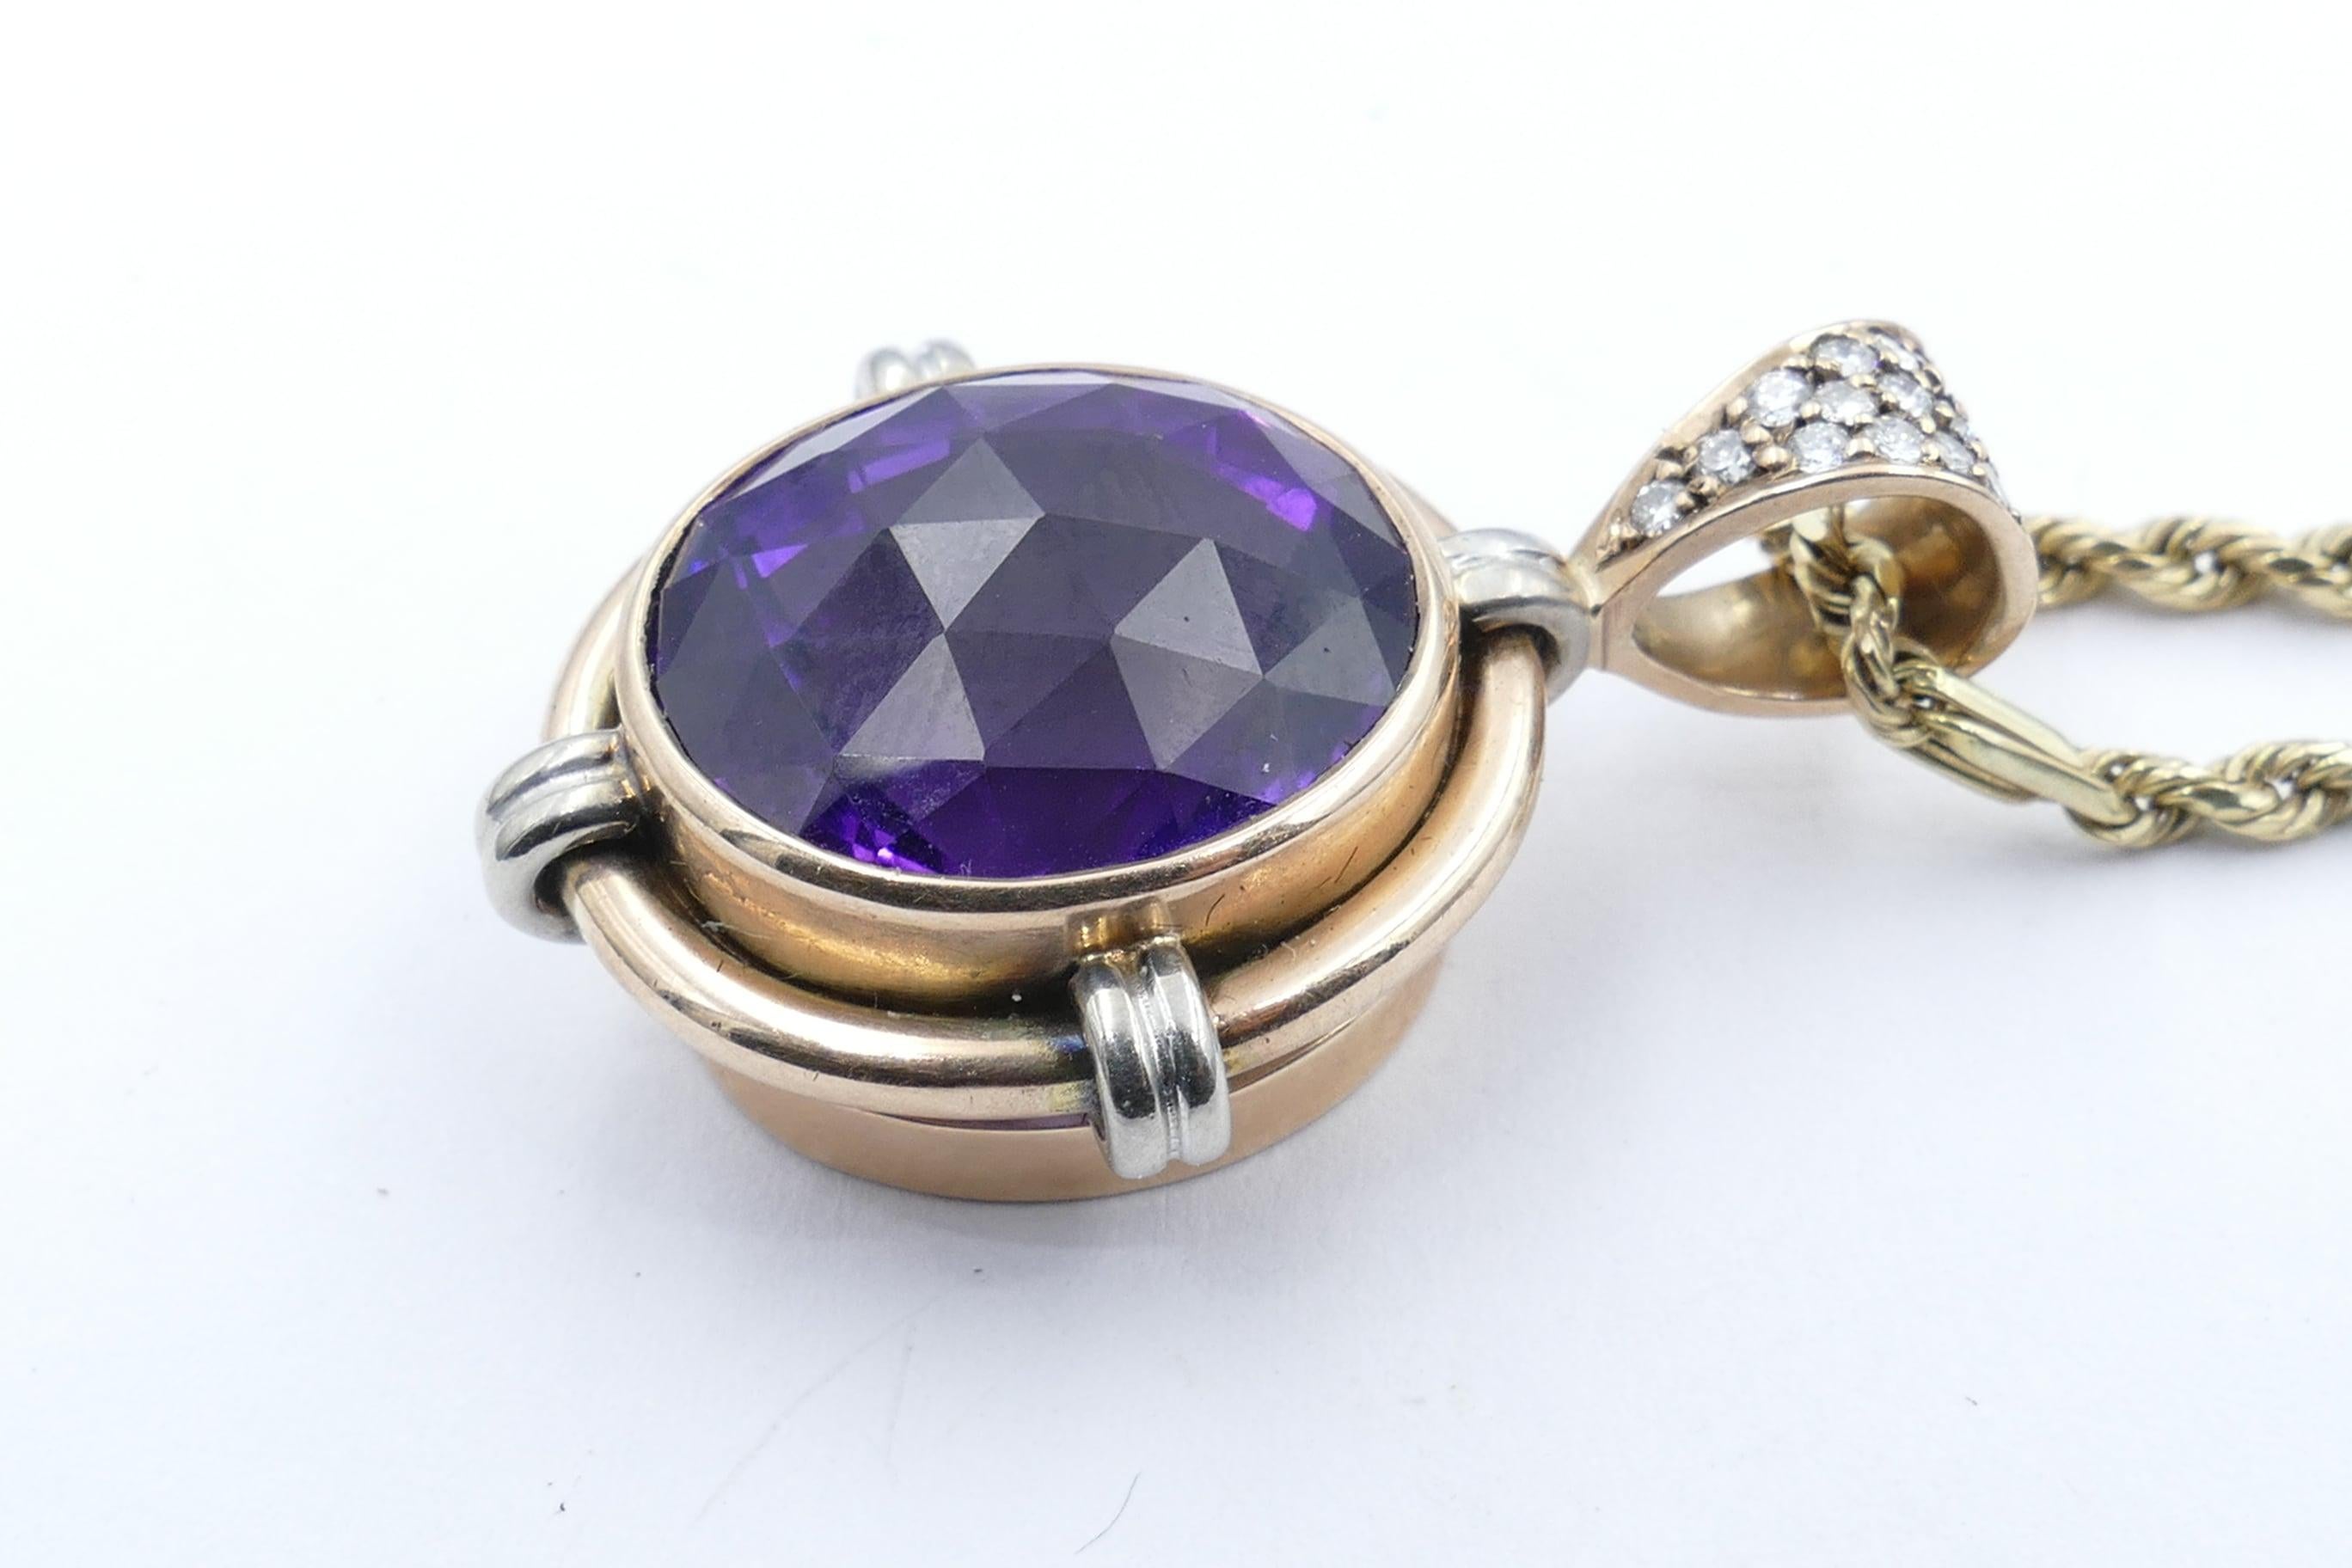 A large deep vivid purple Amethyst is the centrepiece of this beautifully crafted pendant with a Diamond Bail. 
The Stone is 24.01 carats, clarity eye-clean, oval cut, bezel set.
As well there are 13 round brilliant cut Diamonds, Colour G/H, Clarity